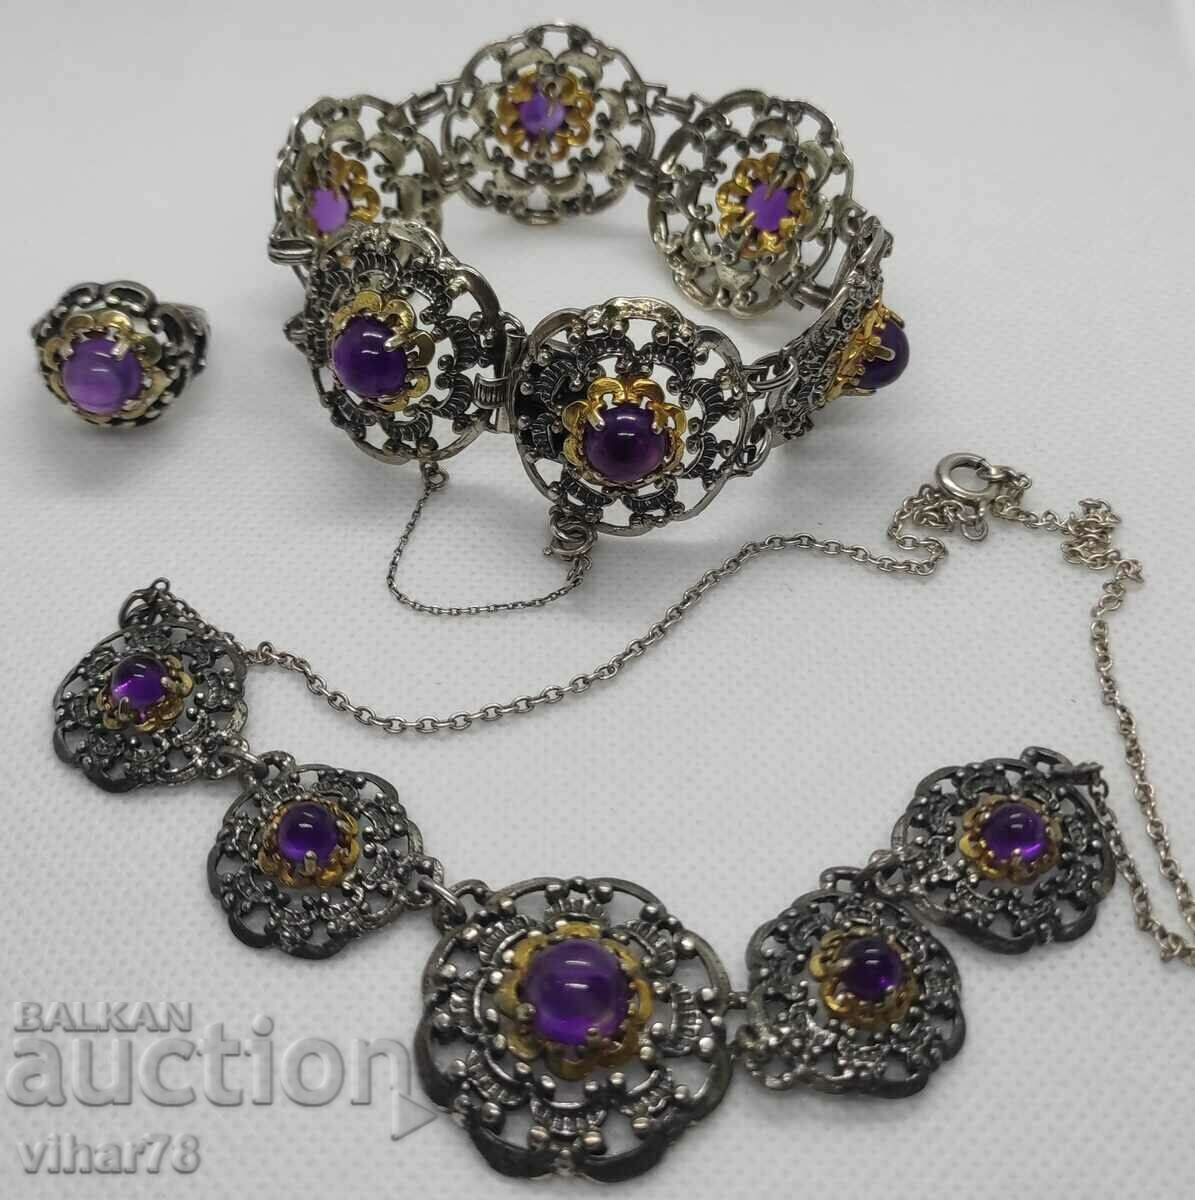 VERY BEAUTIFUL SILVER Set with amethyst necklace, bracelet, etc